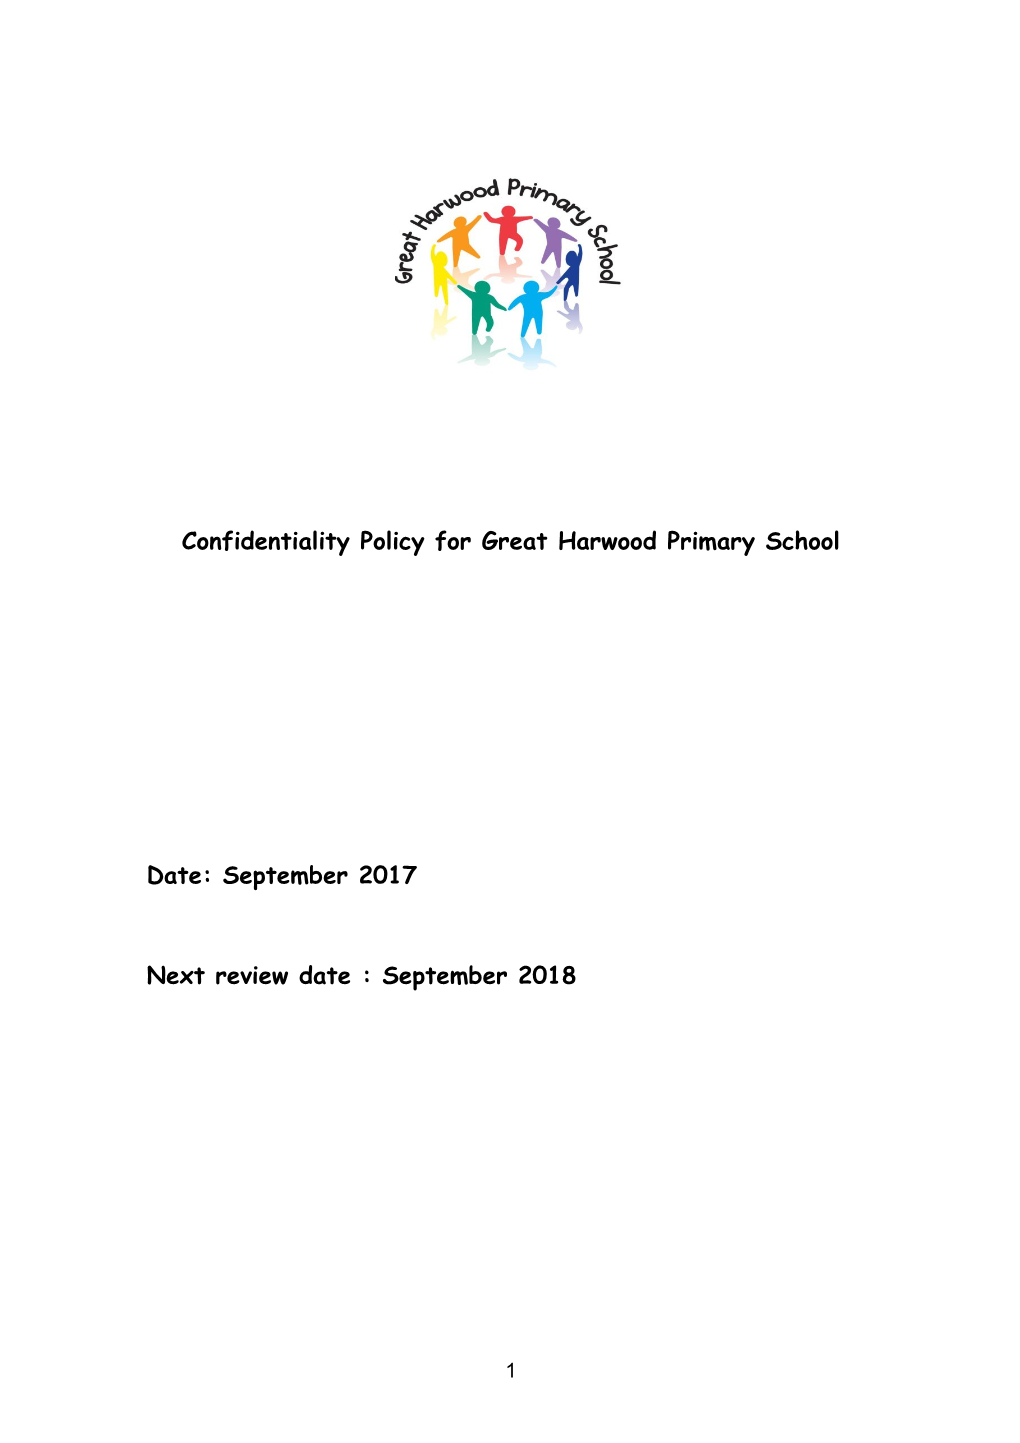 Draft Confidentiality Policy for Schools